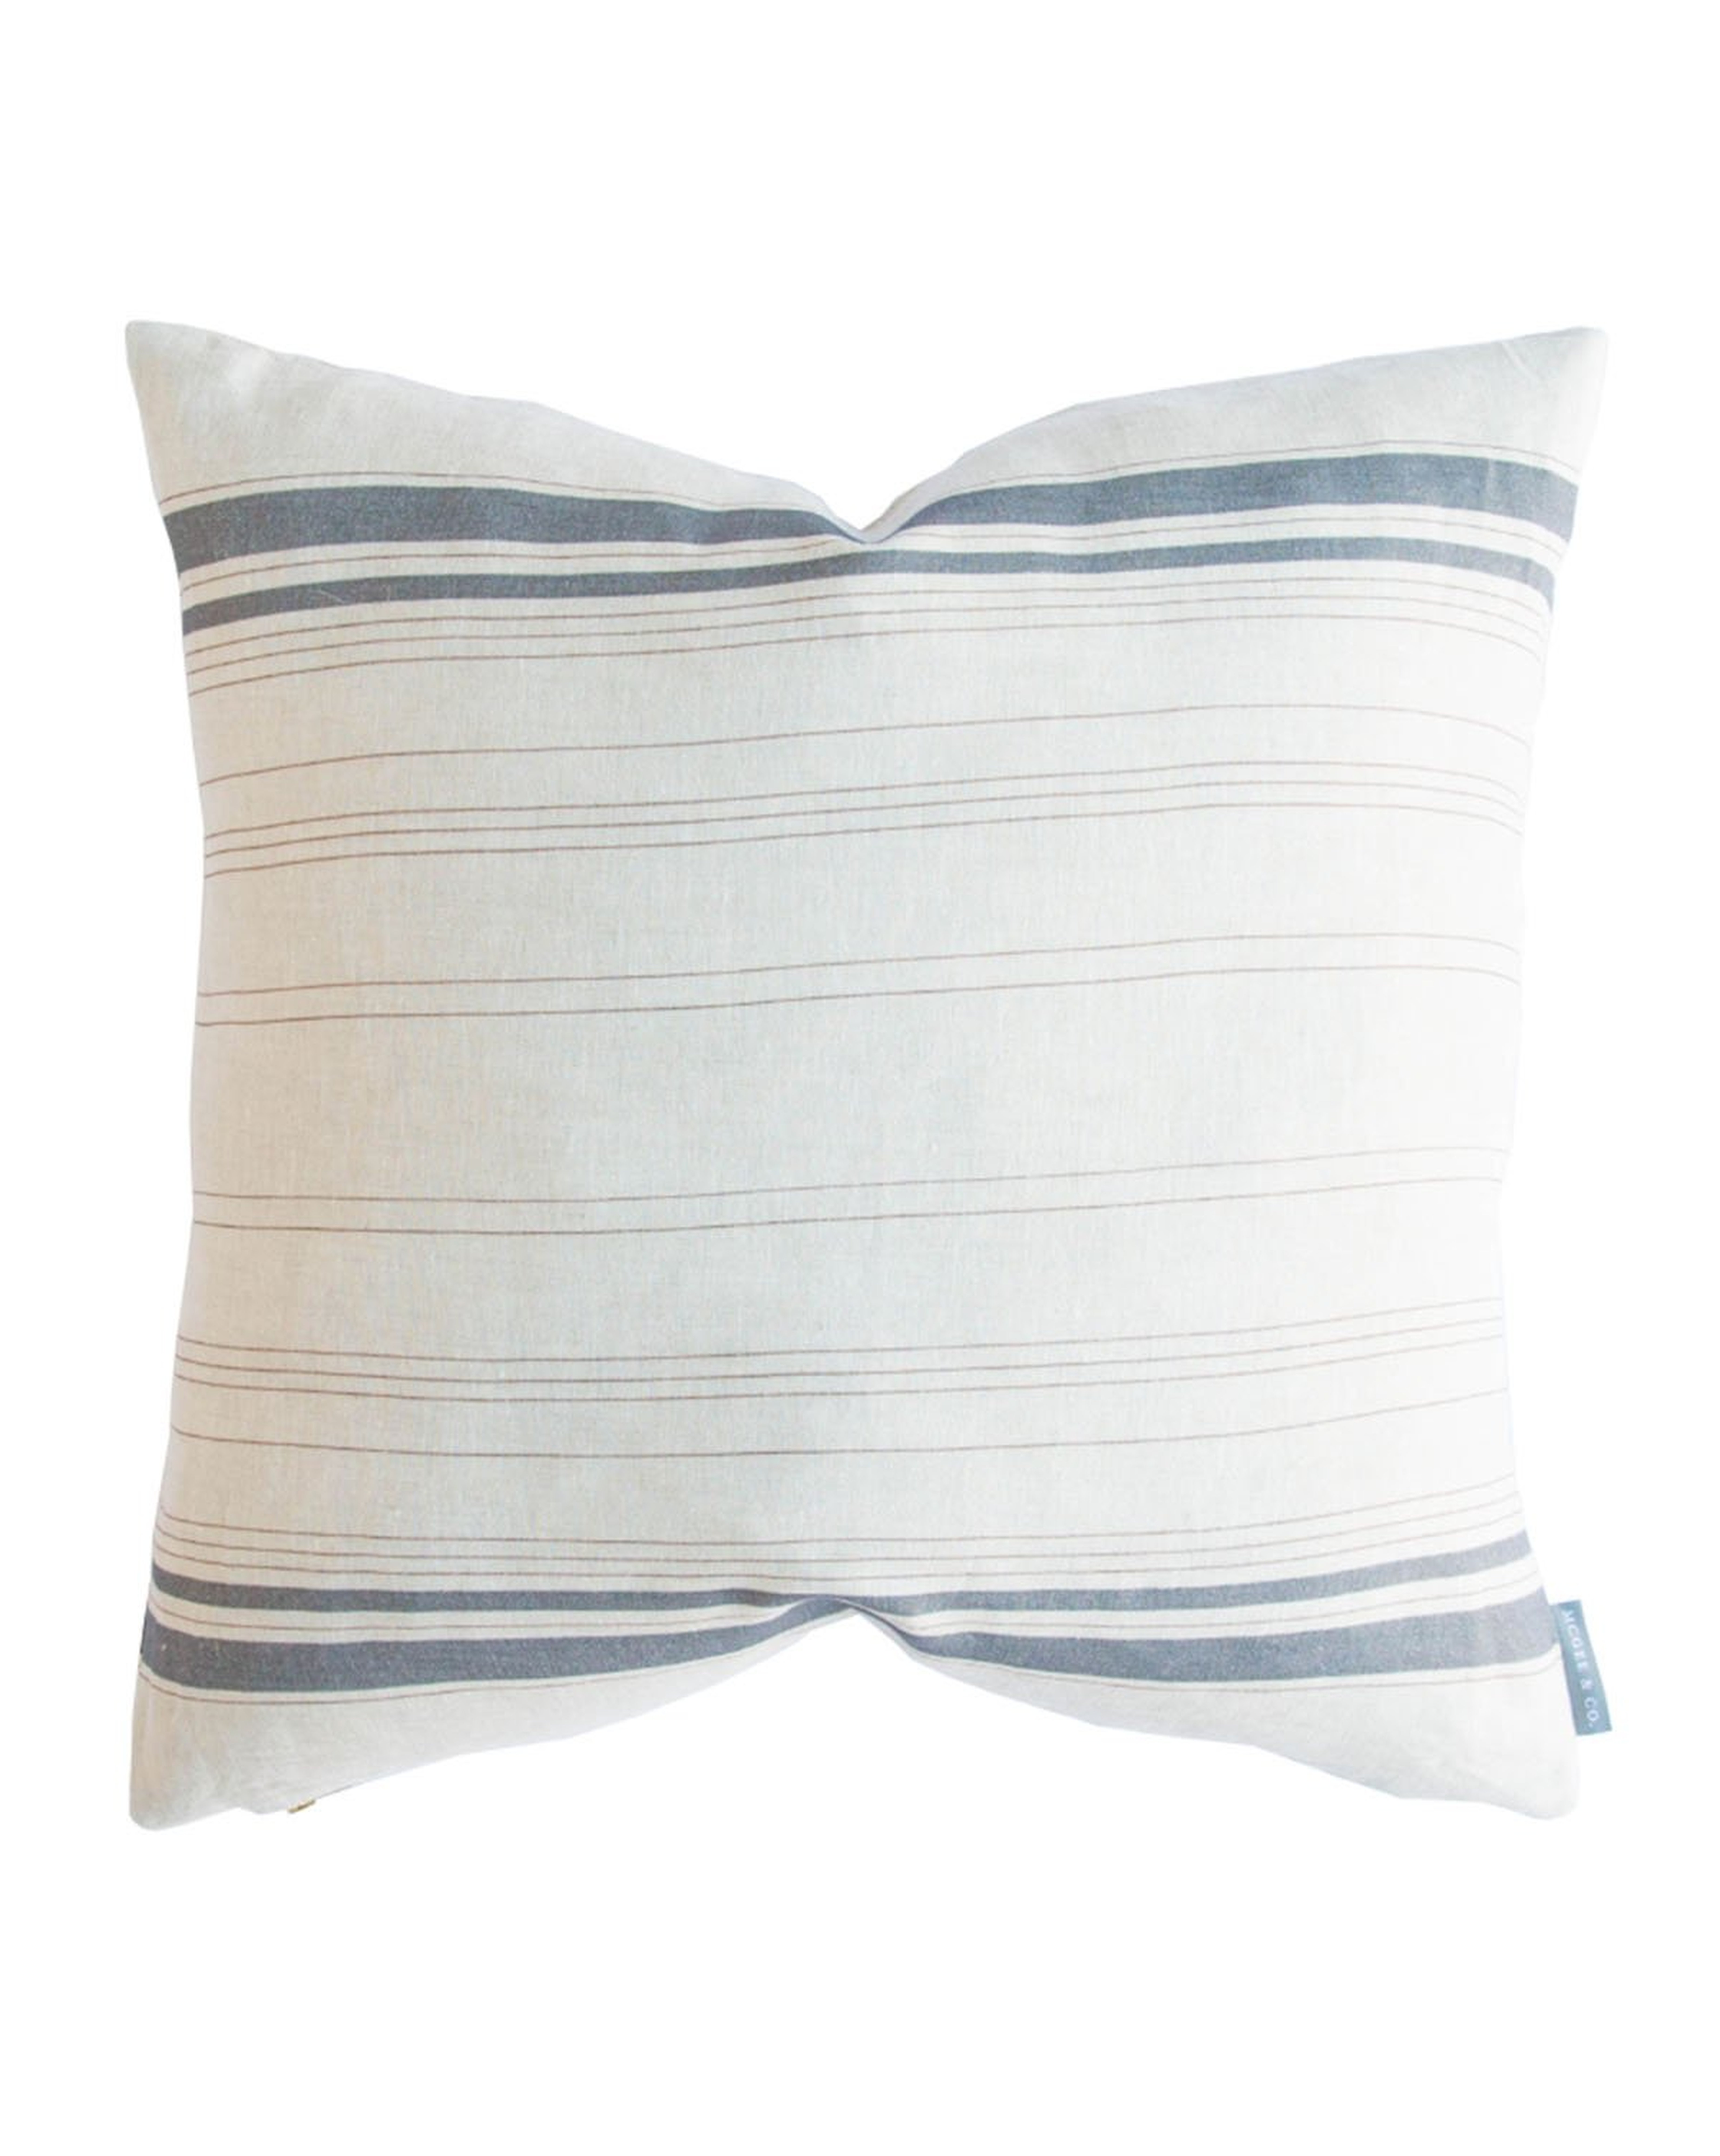 FRENCH STRIPE PILLOW COVER 22" x 22" - McGee & Co.